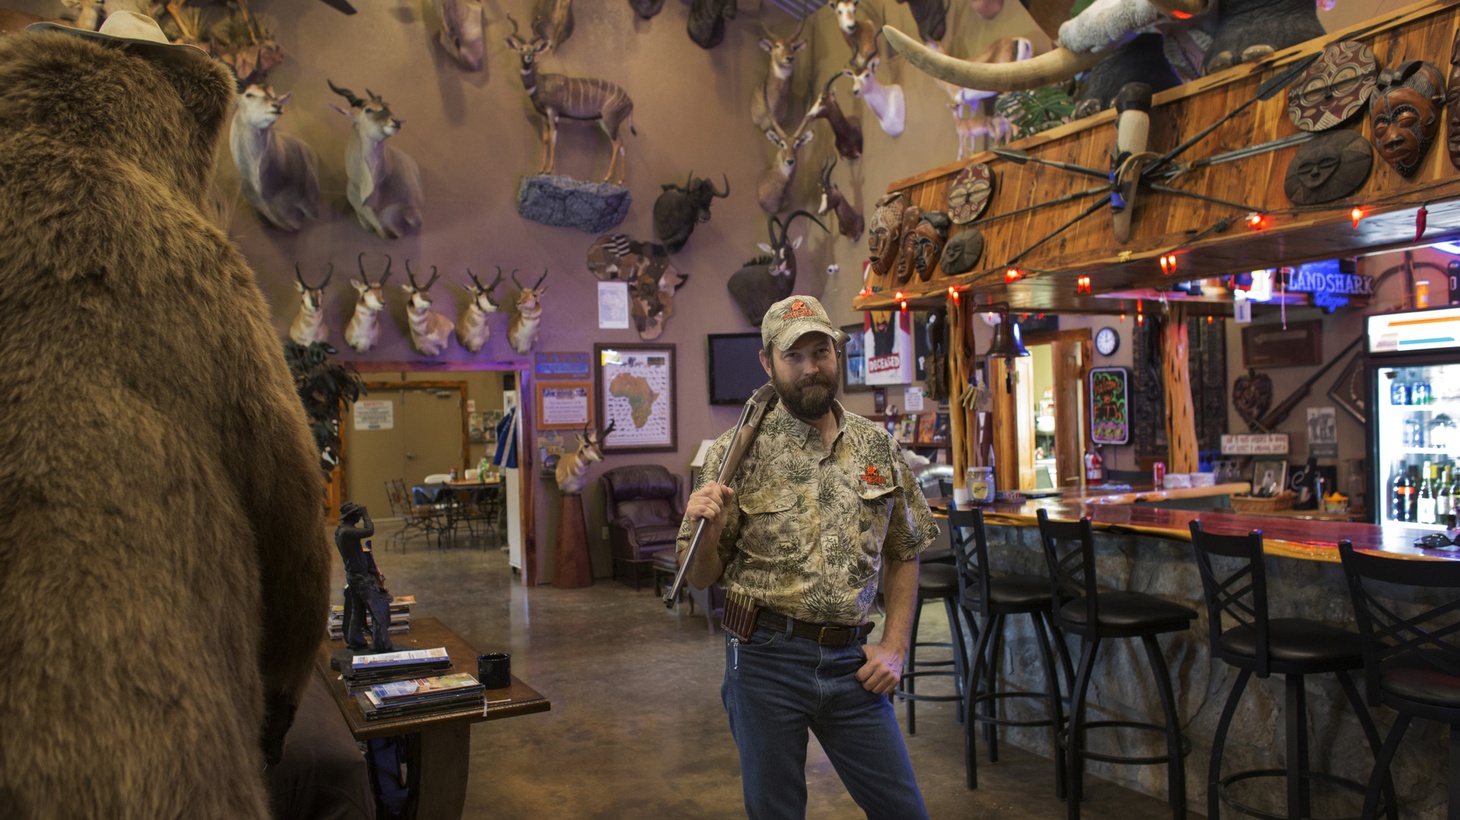 A deep dive into big game hunting -- a world most of us have very strong feelings about...but really know very little.